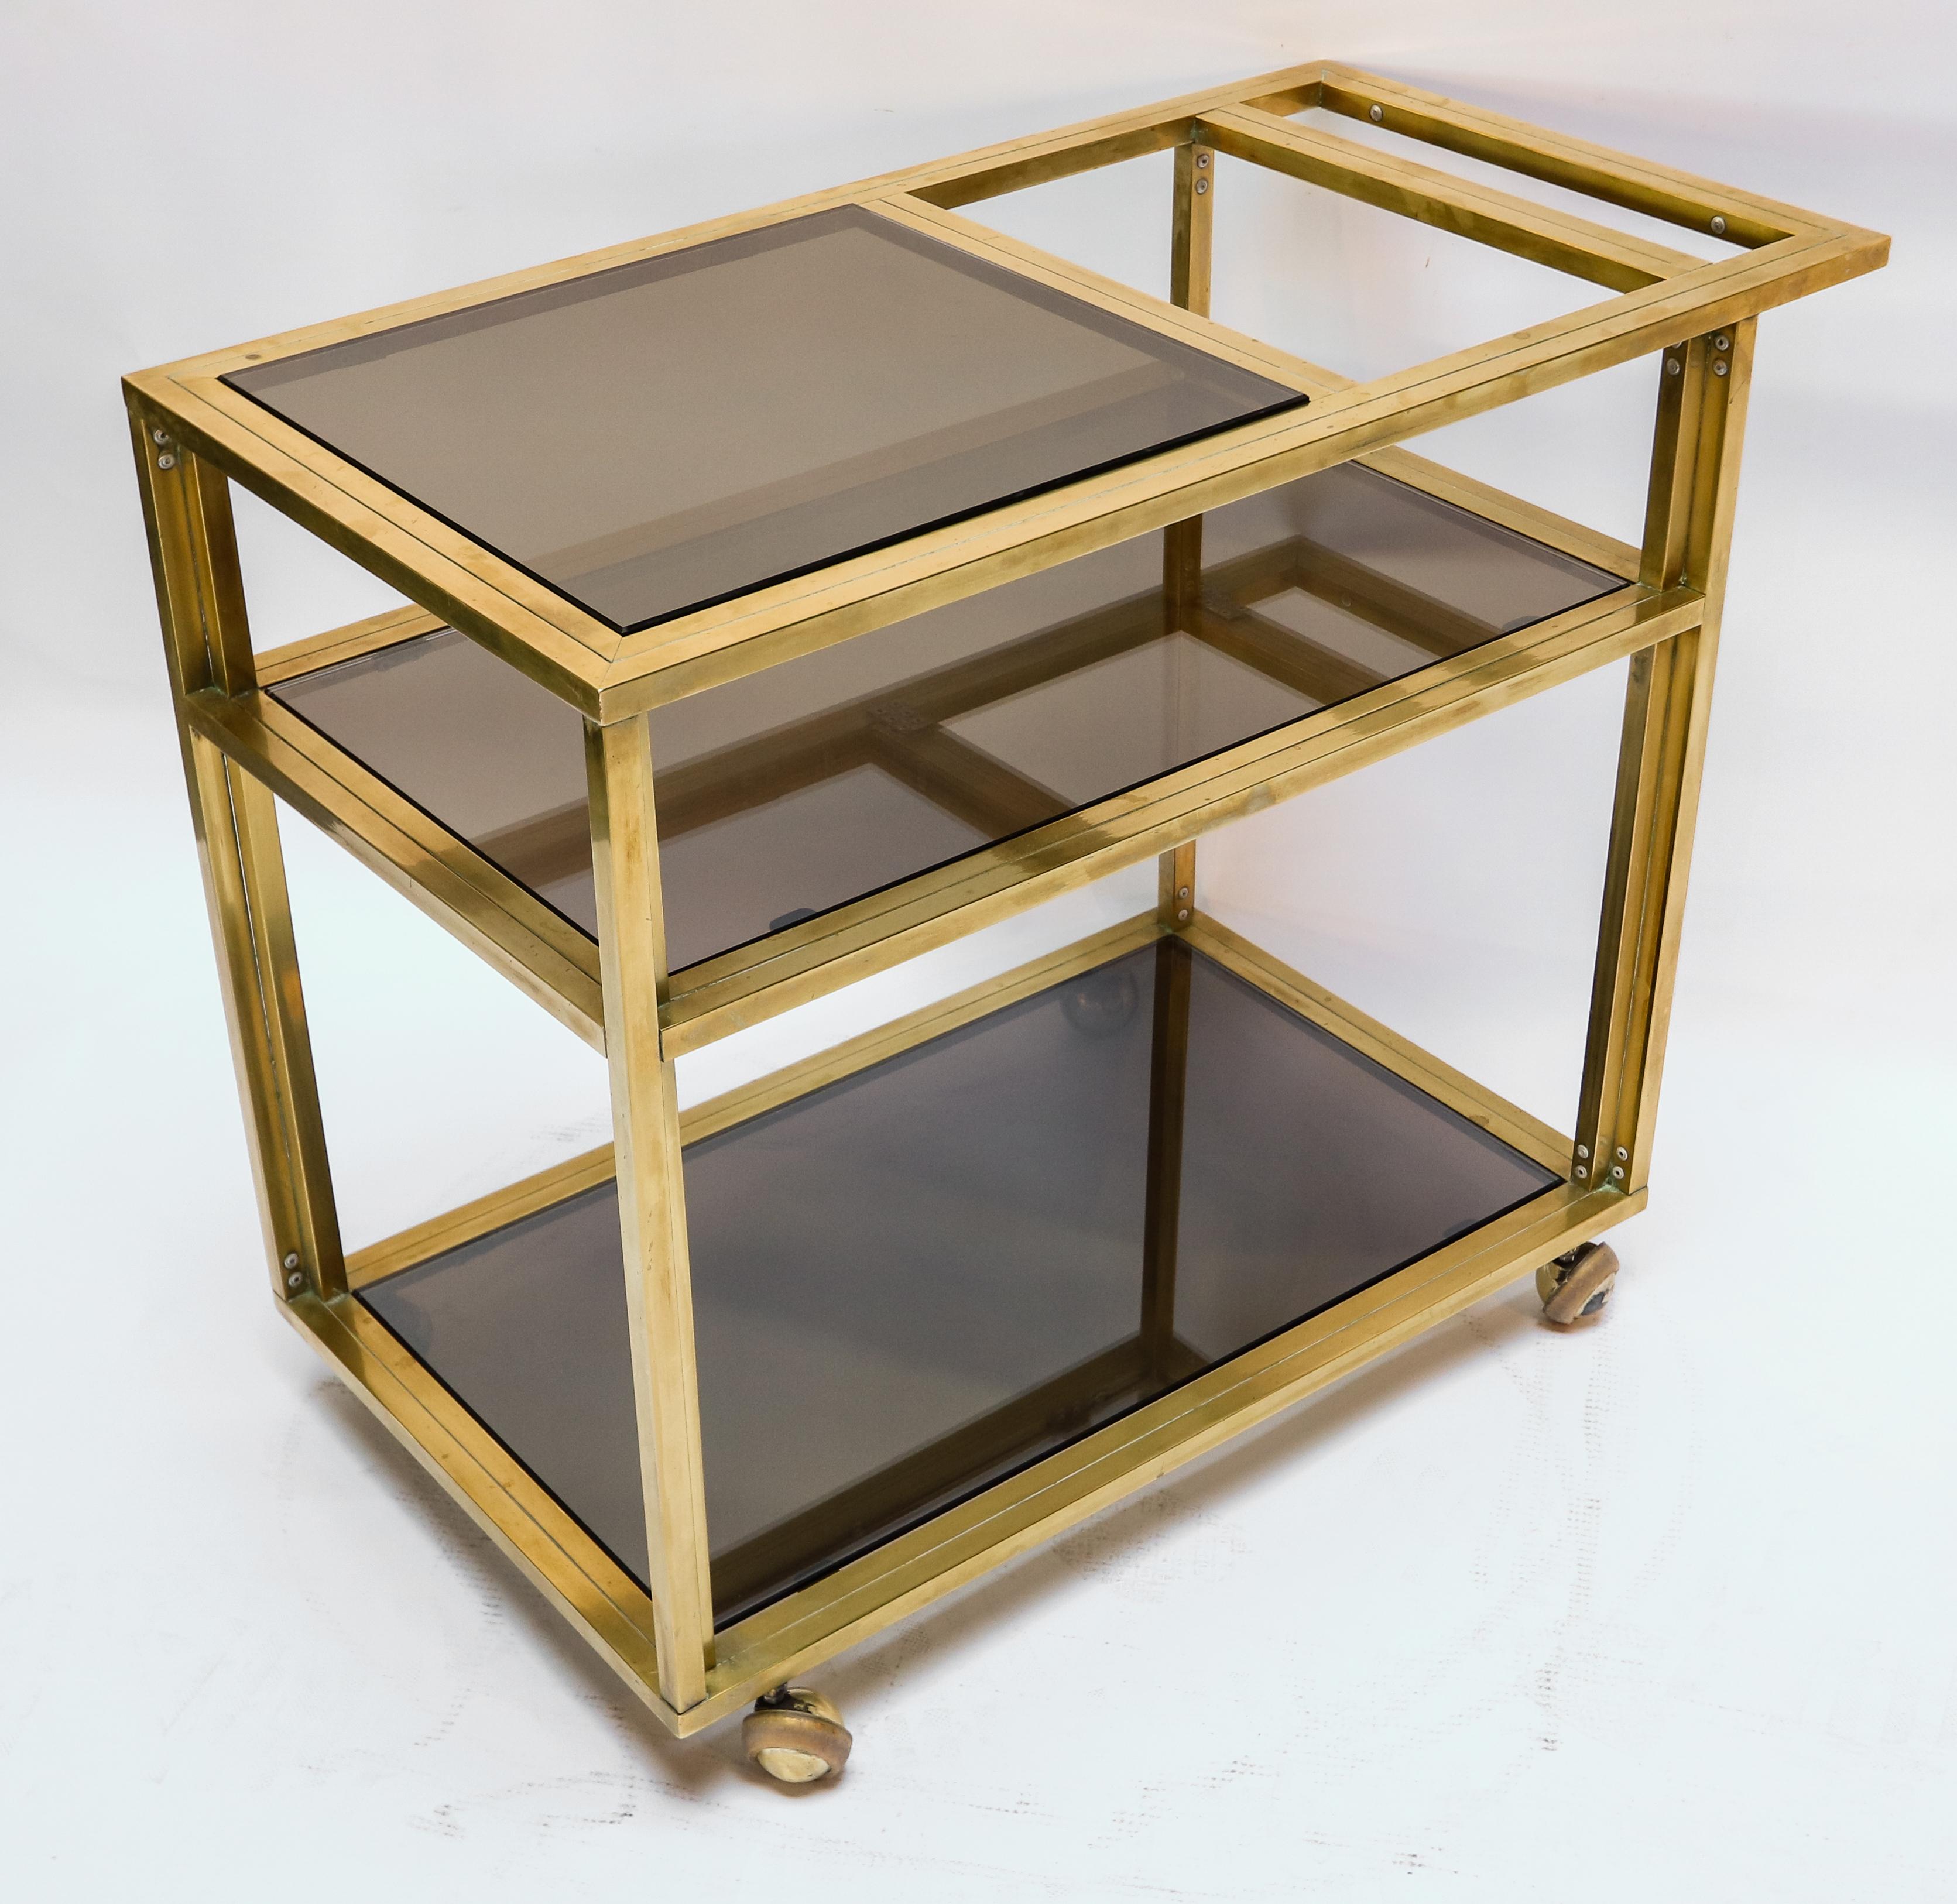 Italian brass bar cart with three smoked glass shelves from the 1970s. Half shelf on top accommodates large bottles on the second shelf.